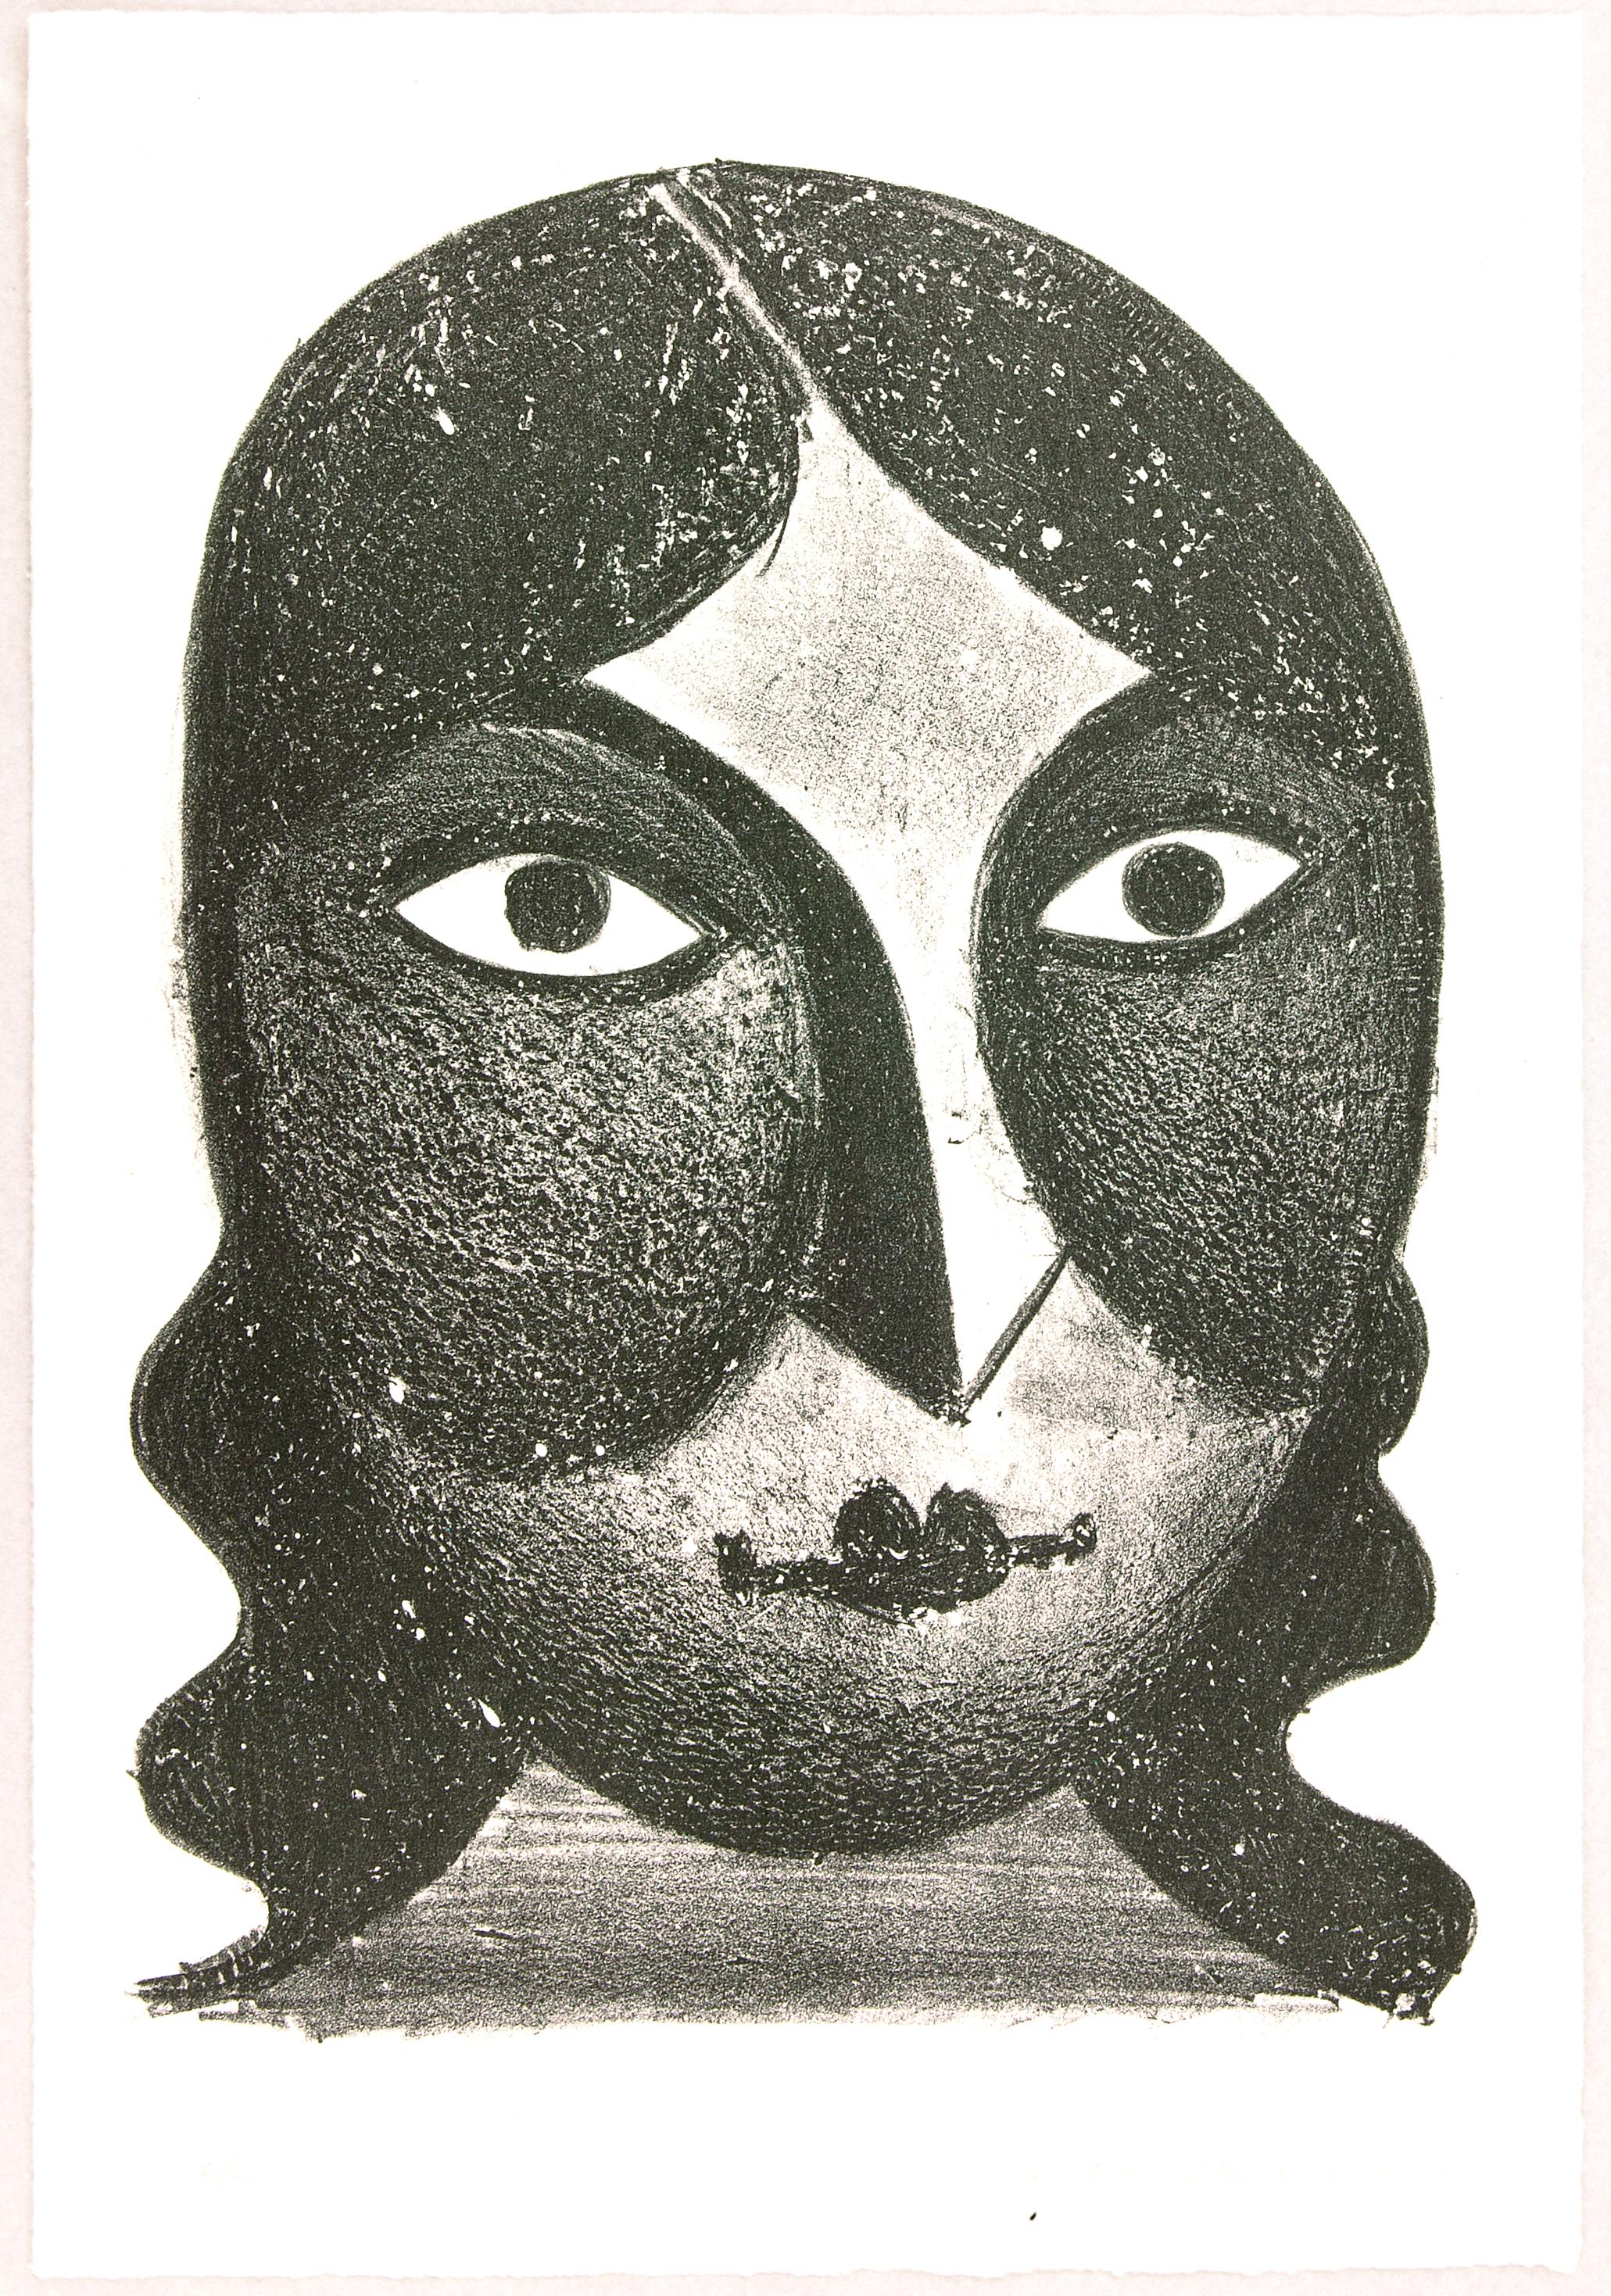 Christoph Ruckhaberle Figurative Print – Christoph Ruckhäberle Untitled, 2007 Edition 6 of 20, Lithograph, 15 x 10 inches